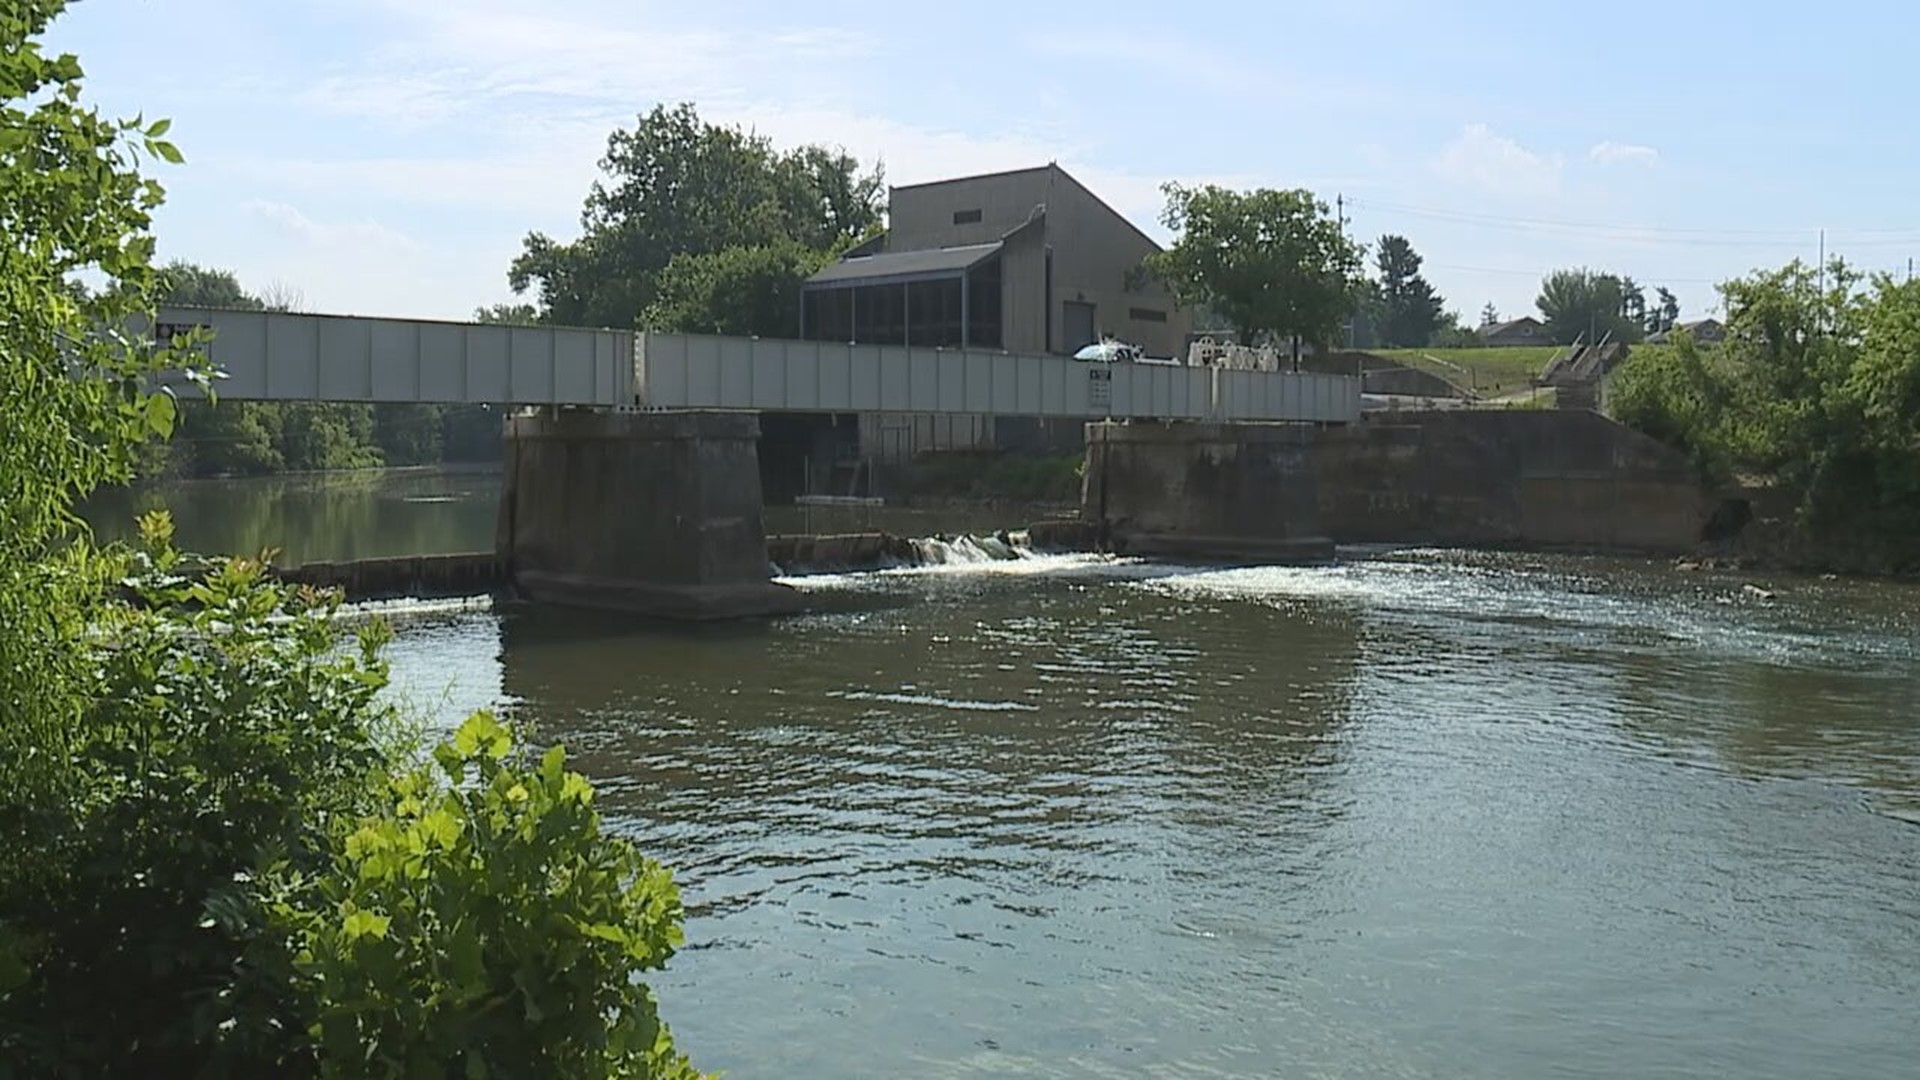 According to the City's Bureau of Water, the odd smell and taste is due to an algae bloom in the Conestoga River that accounts for 40% of their water supply.